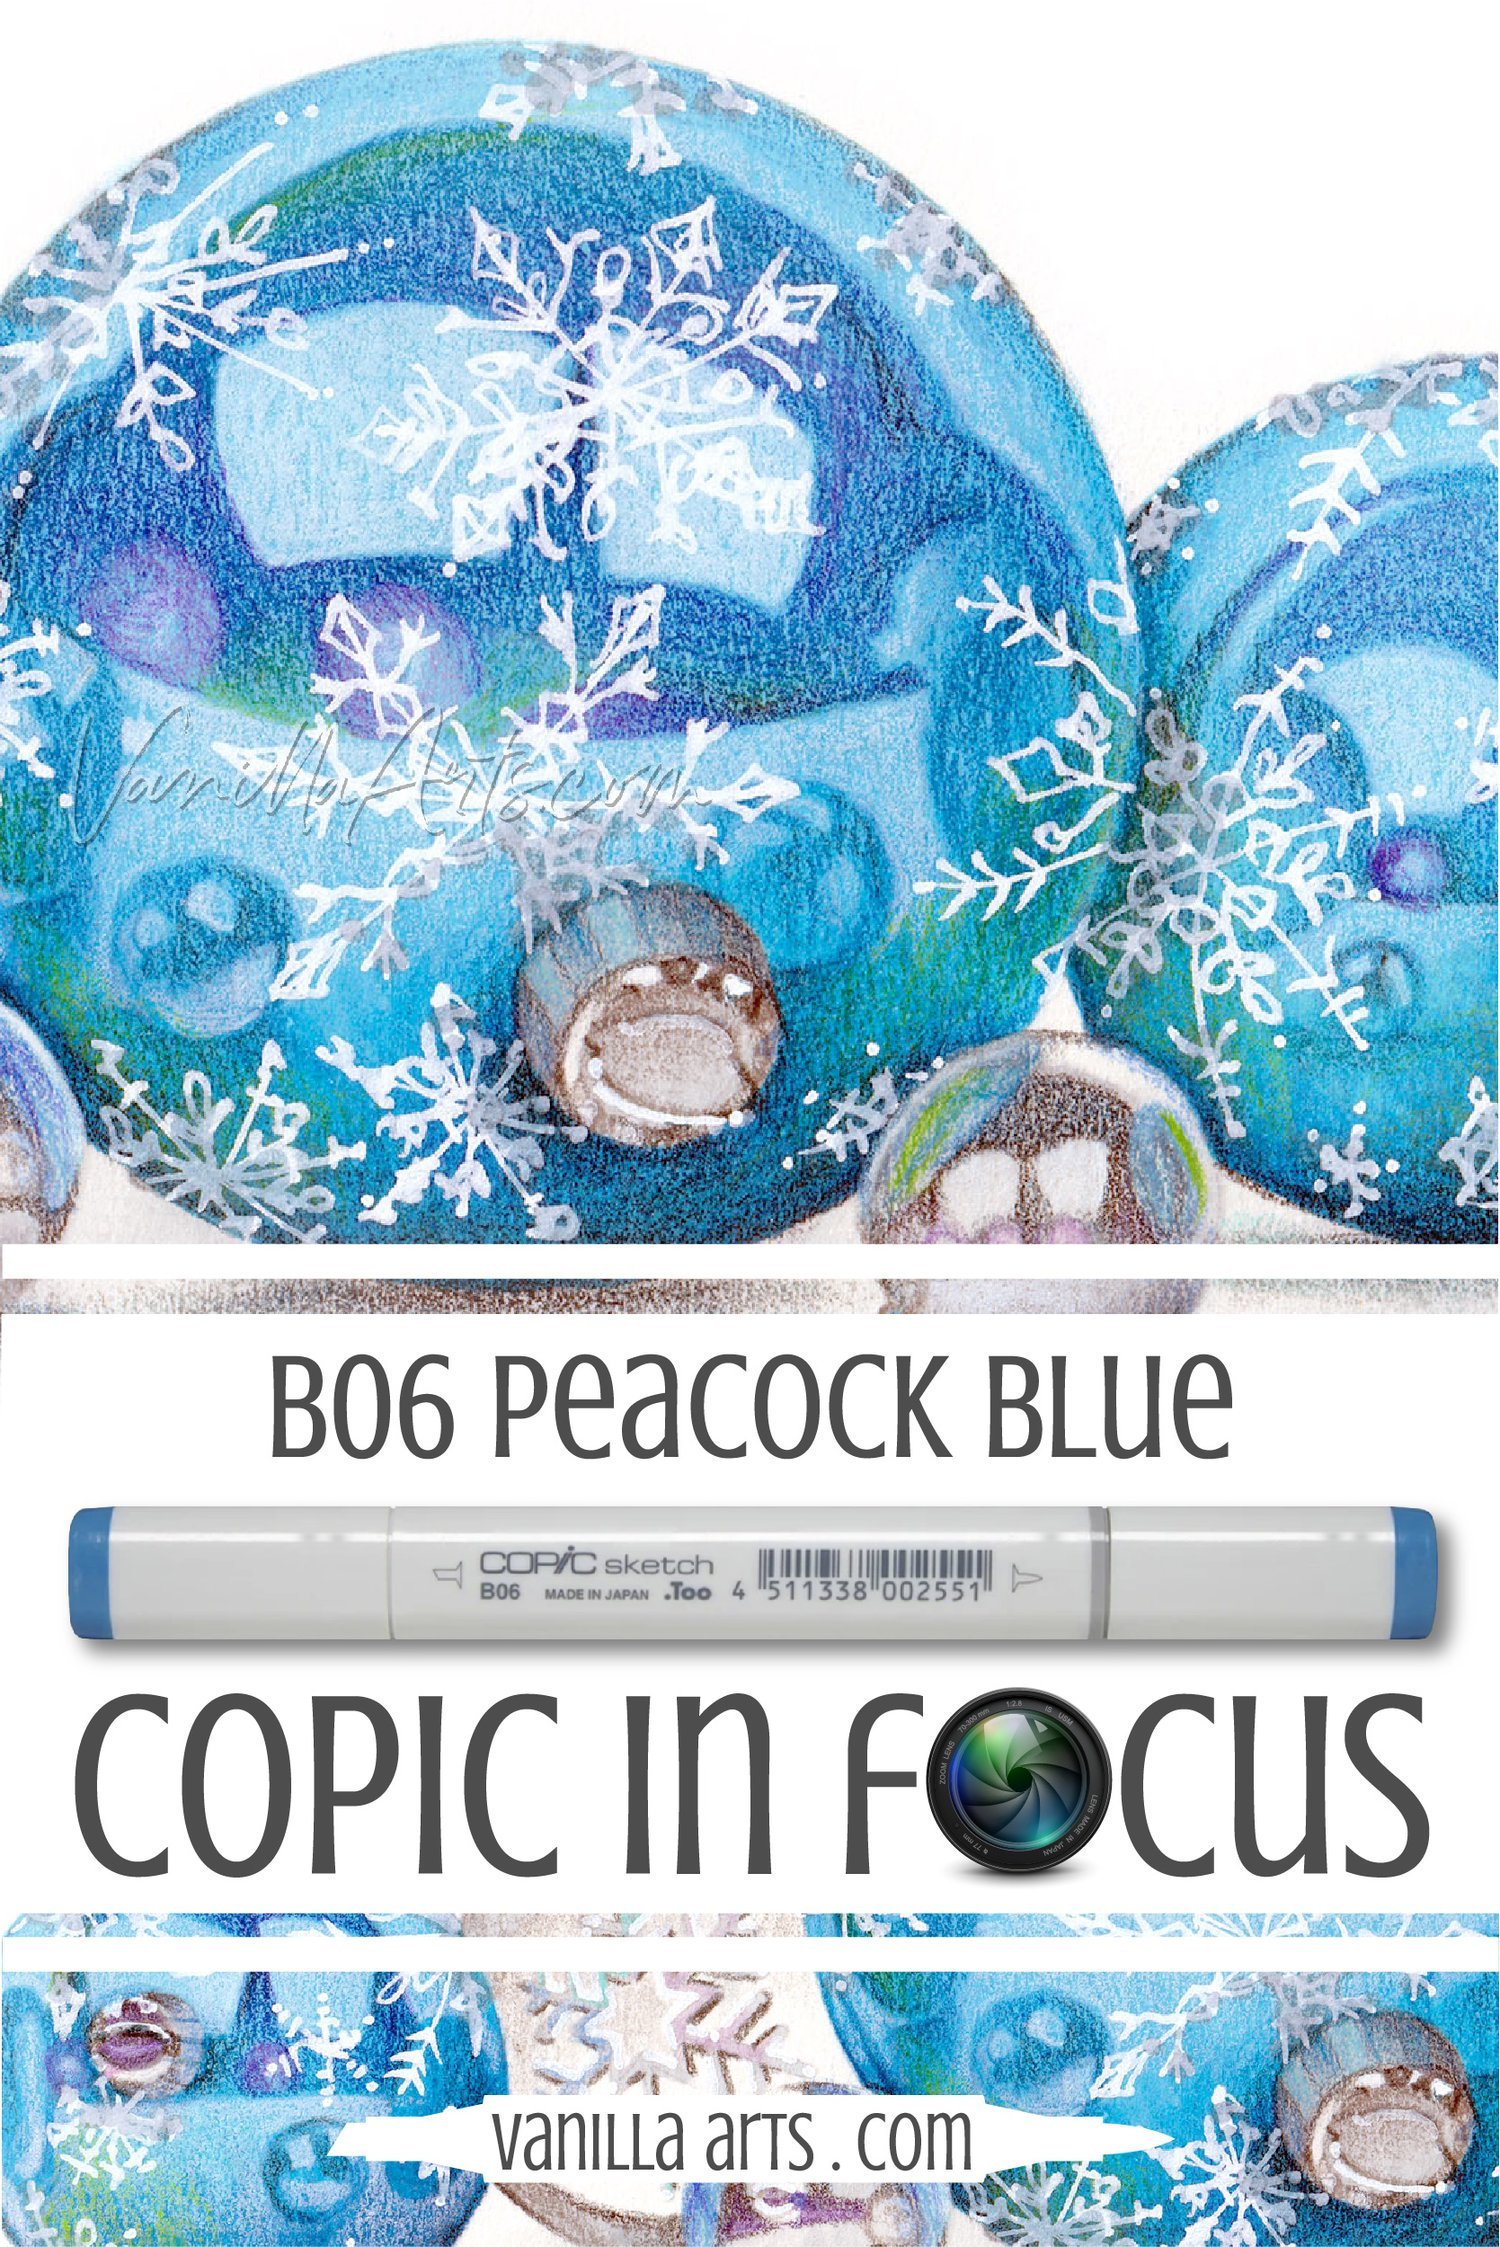 Colors in Focus: B06 “Peacock Blue” Copic Marker (Everything you need to know and more)